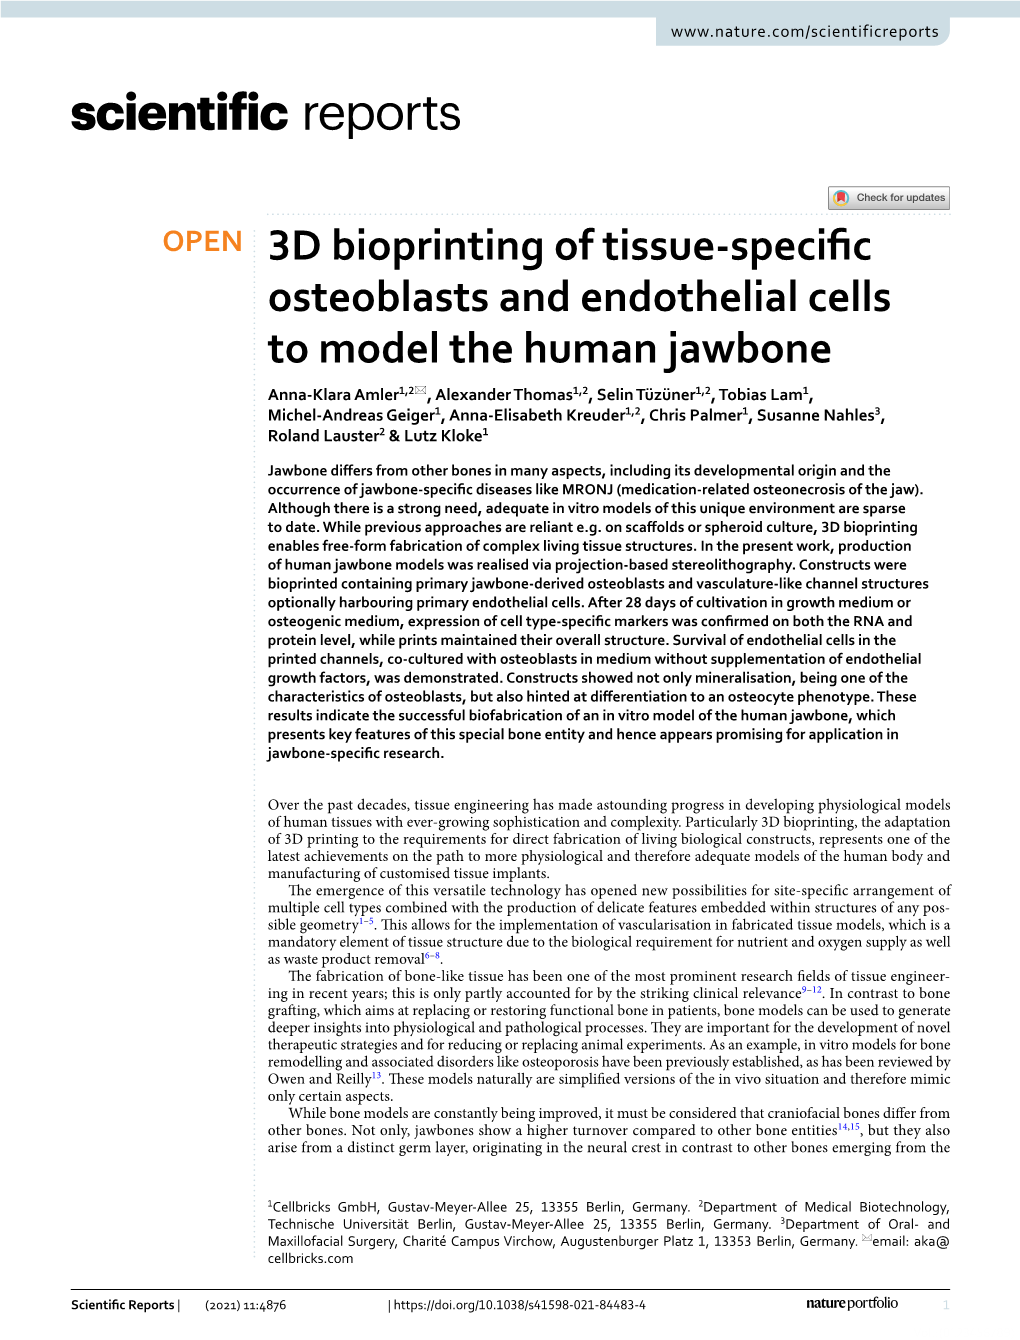 3D Bioprinting of Tissue-Specific Osteoblasts and Endothelial Cells To